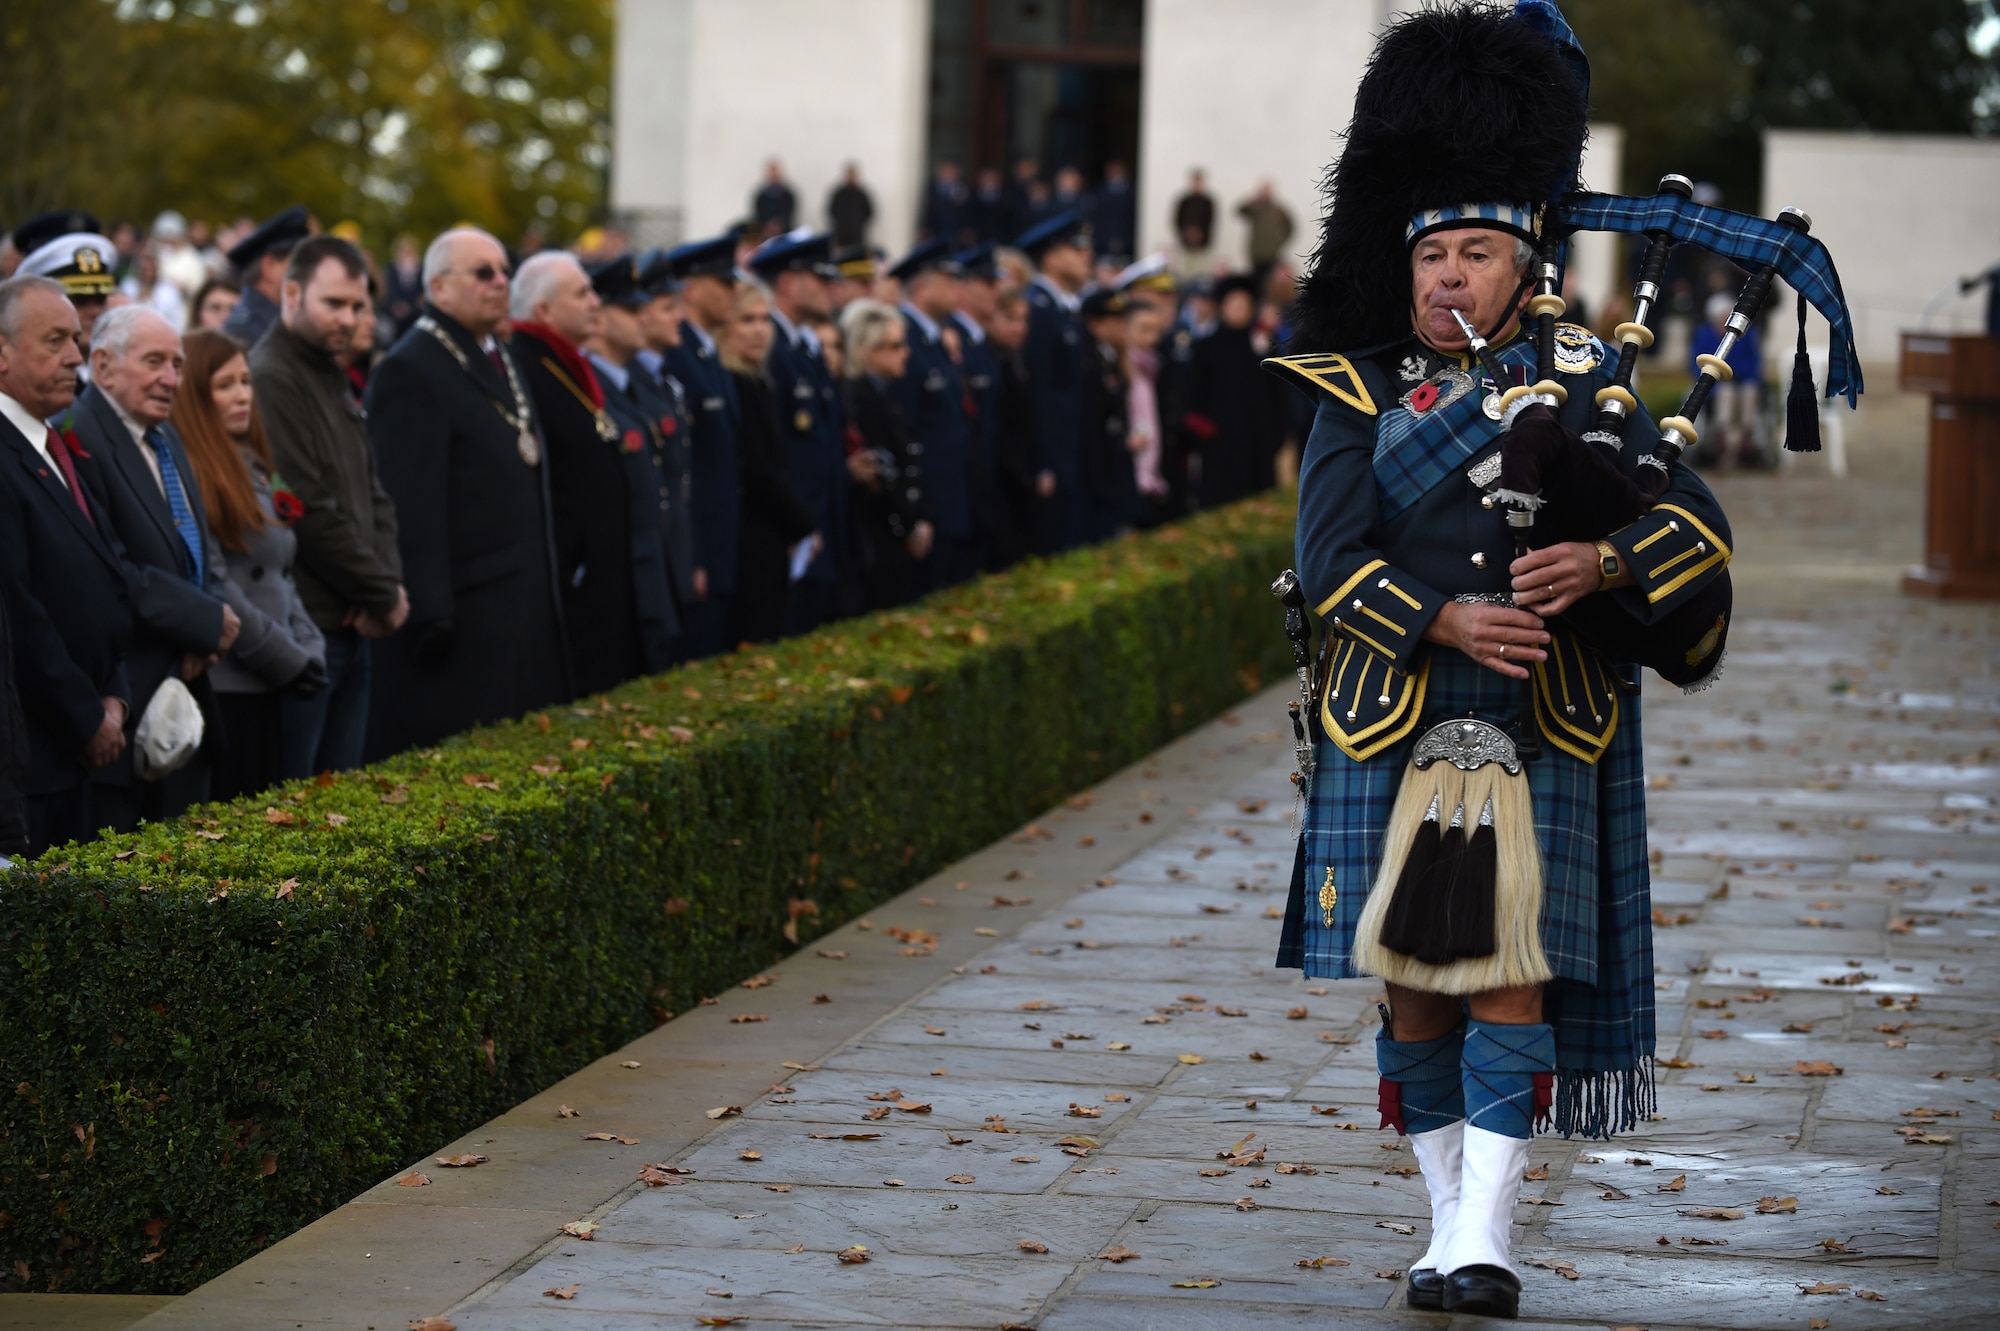 Royal Air Force Warrant Officer, retired, Gary Kernaghan plays the bagpipes during a Veterans Day ceremony at Cambridge American Cemetery, United Kingdom, Nov. 11, 2014. Since 1919, the United States has set aside the 11th day of November to remember the sacrifices of veterans both past and present. (U.S. Air Force photo by Staff Sgt. Jarad A. Denton)